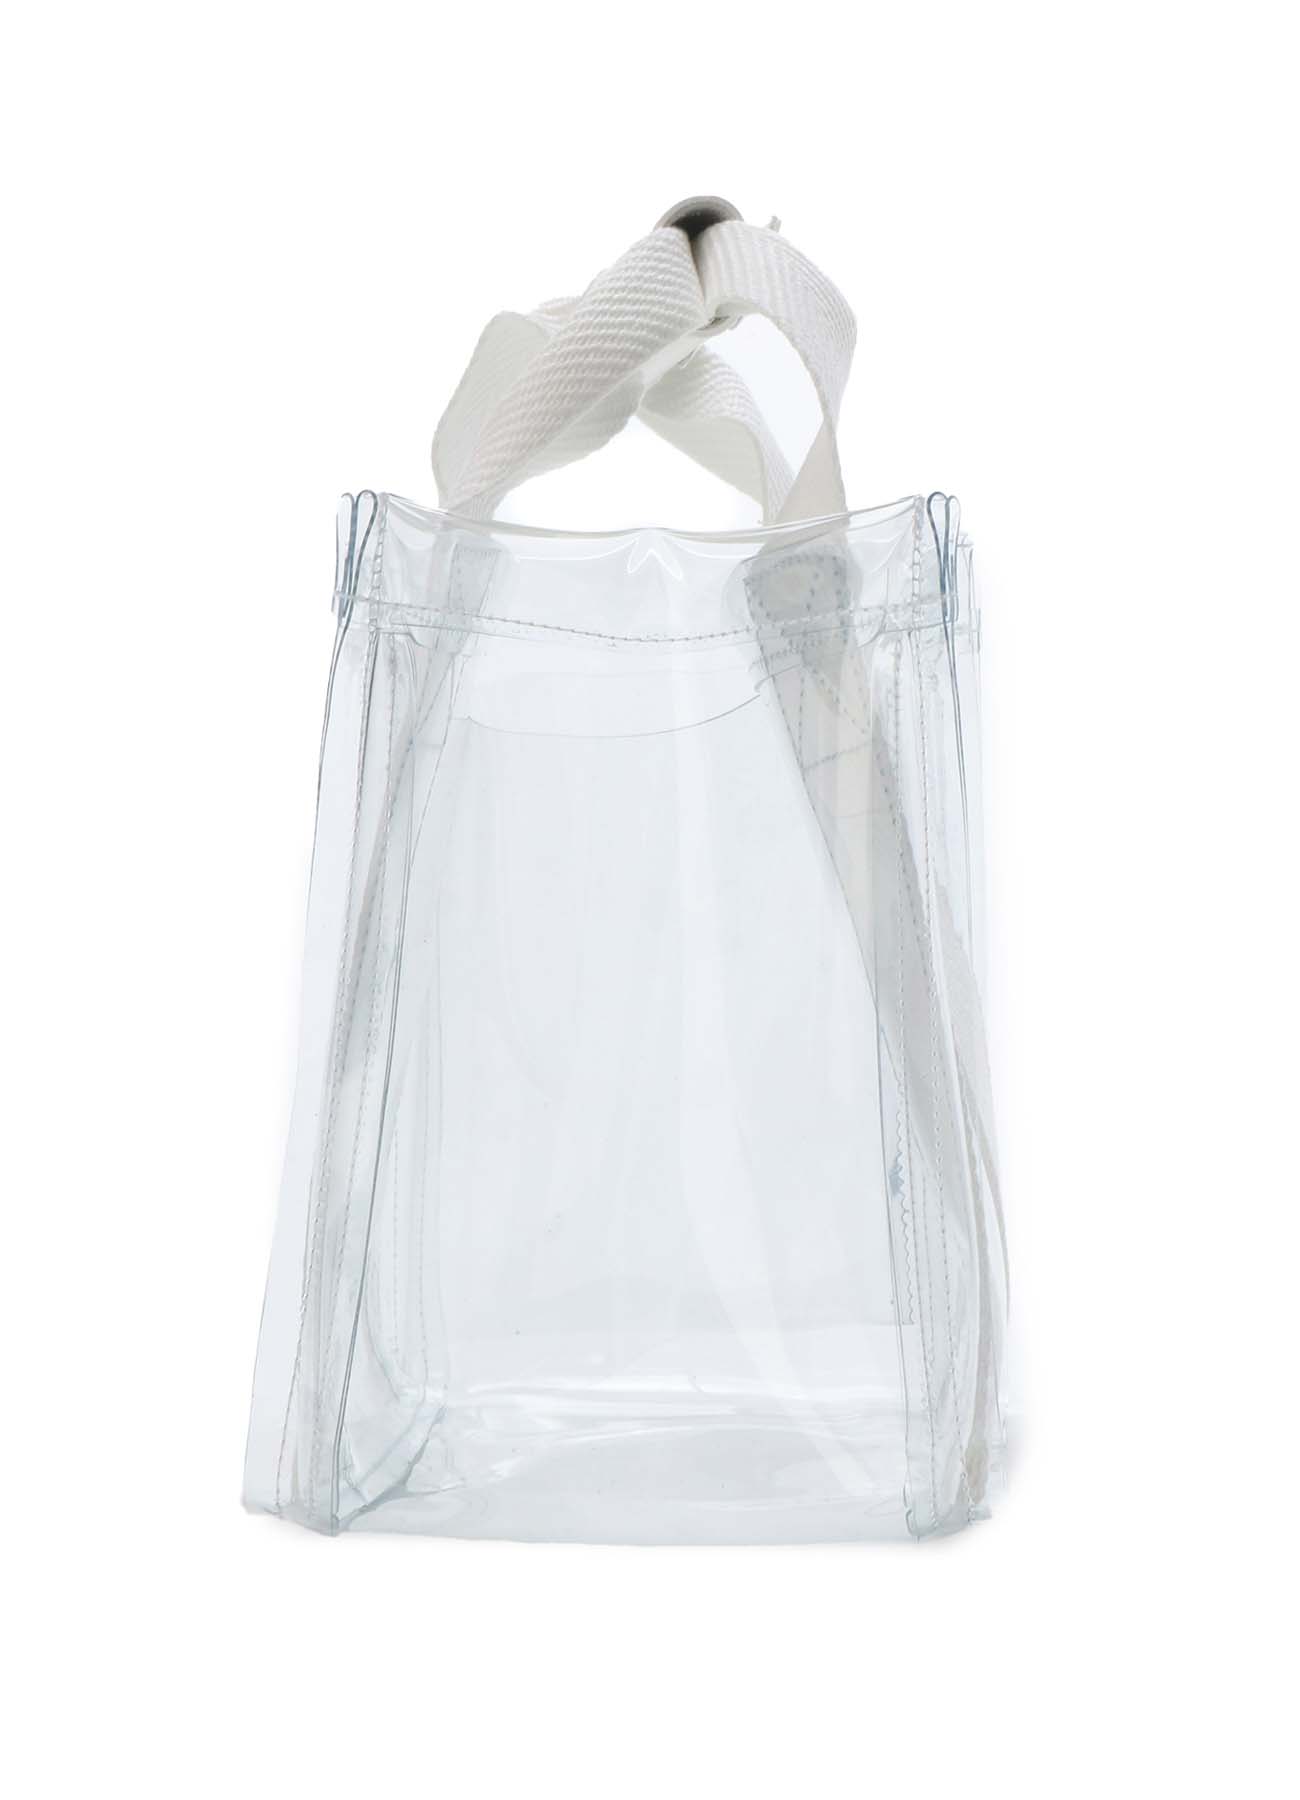 [THE SHOP Limited Product] PVC Hand Bag